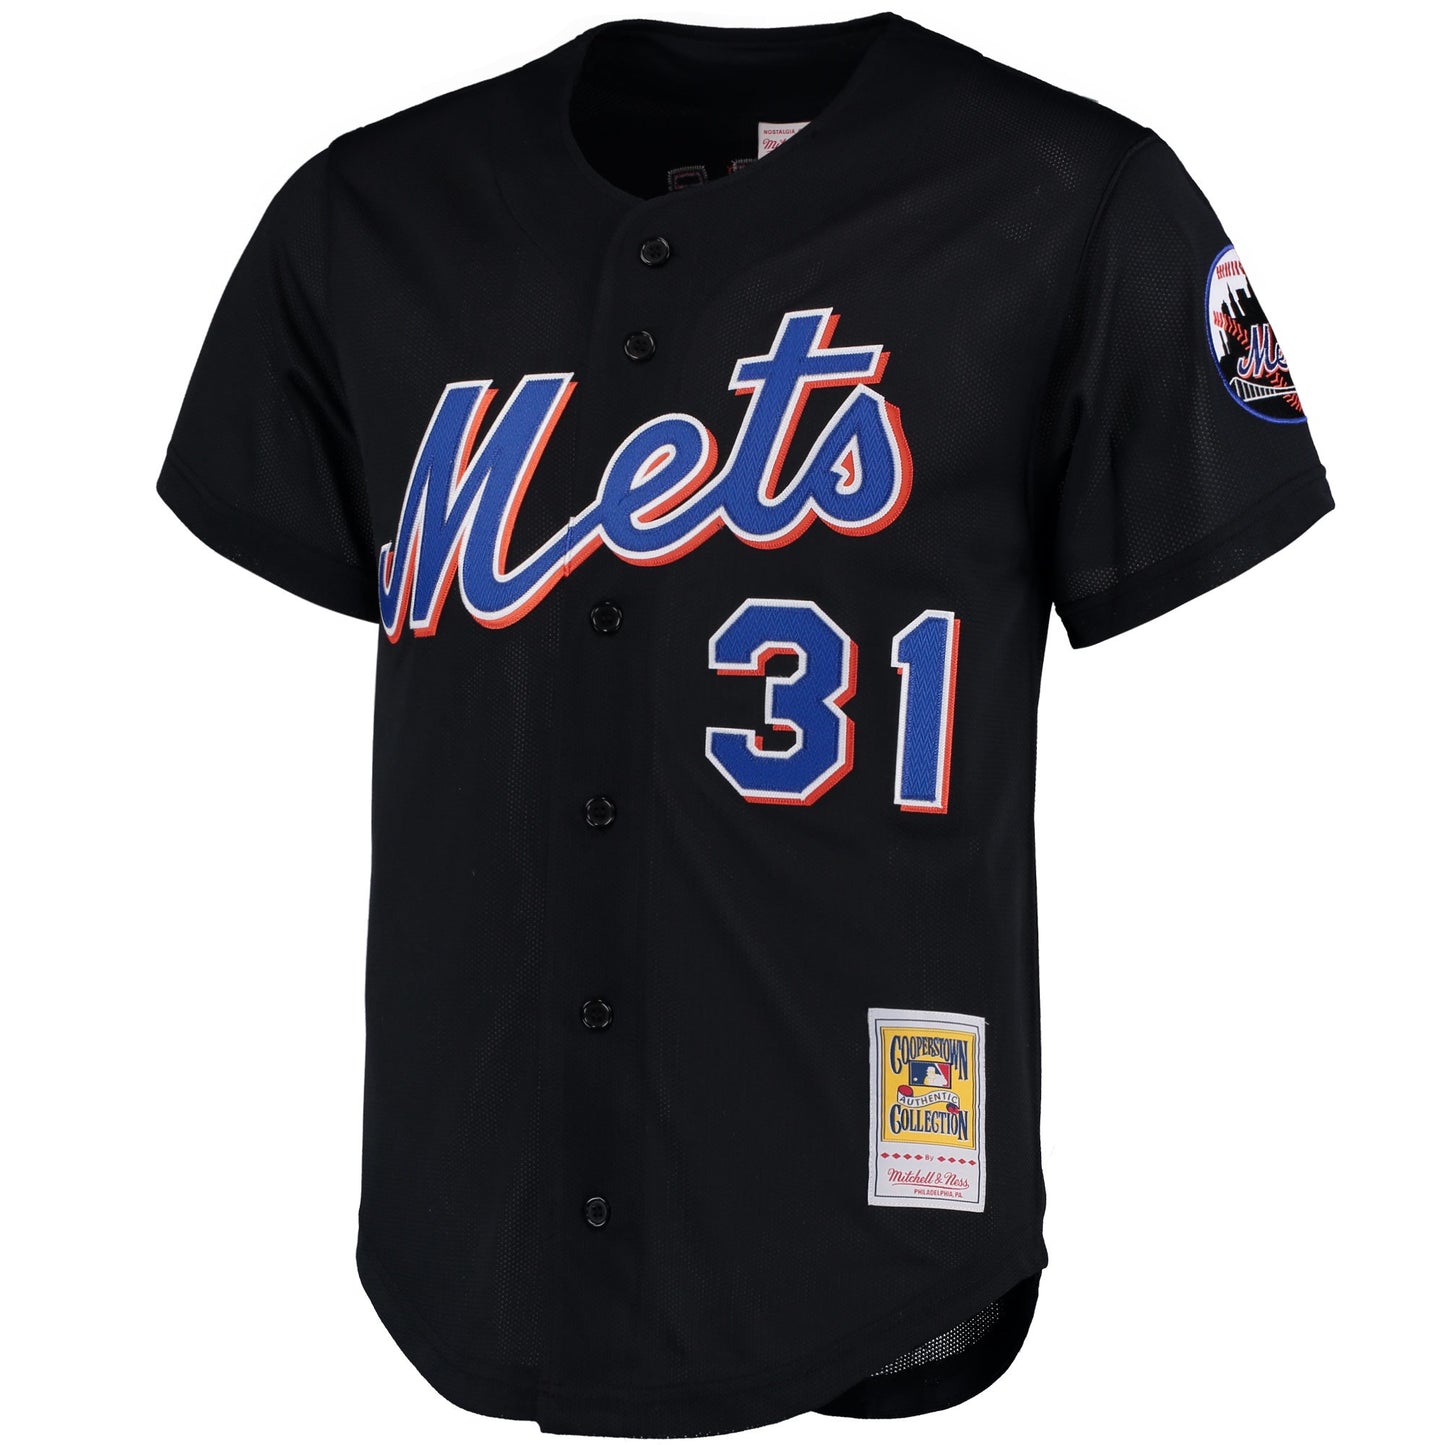 Men's New York Mets Mike Piazza Mitchell & Ness Black Cooperstown Collection Mesh Batting Practice Jersey